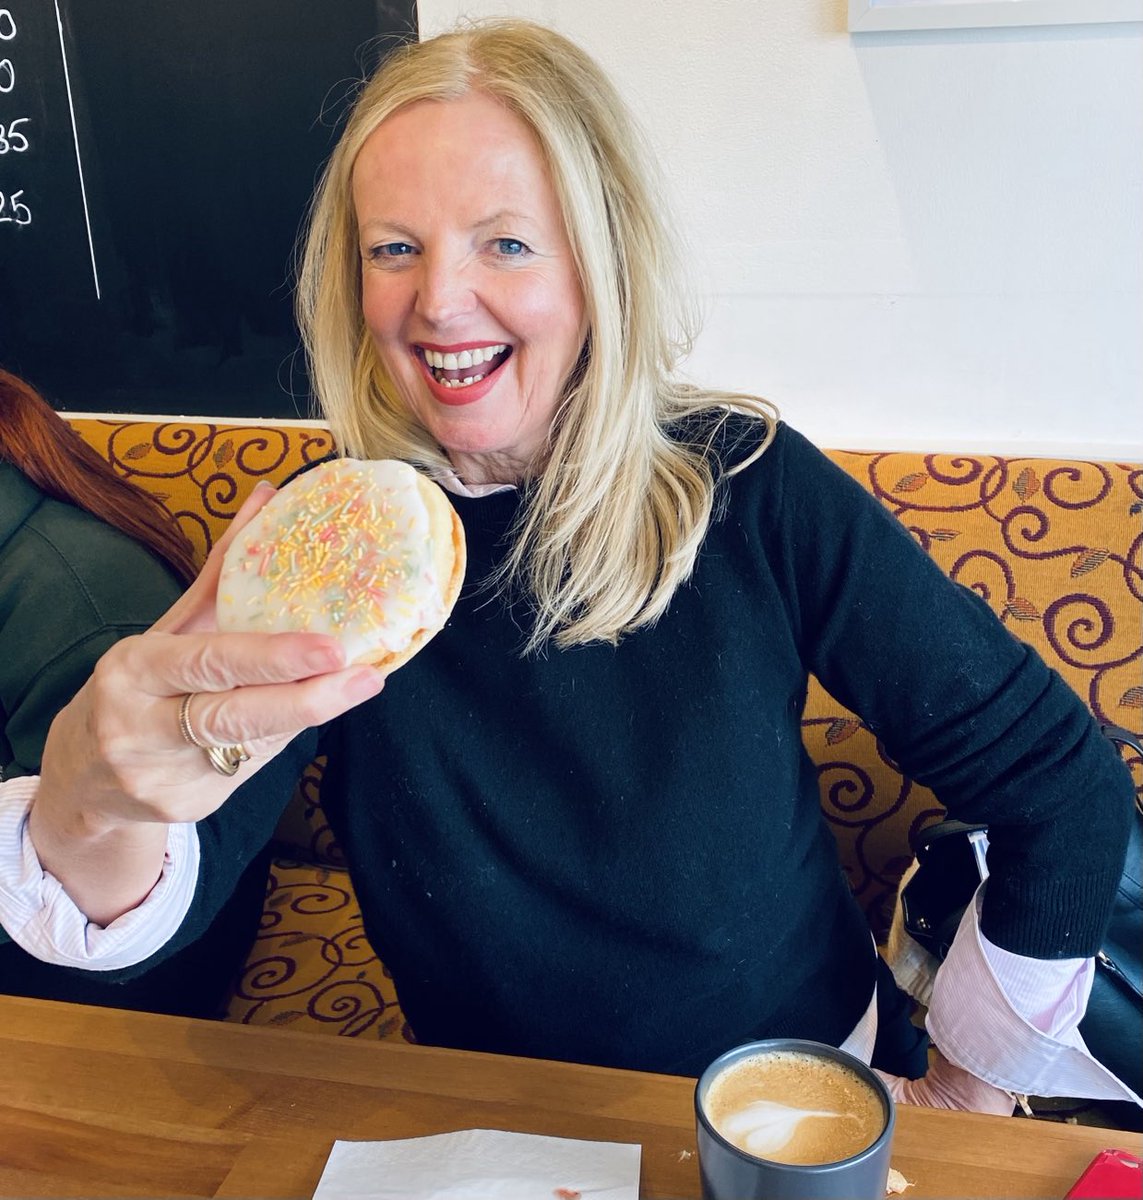 Feel my empire biscuit isn’t quite big enough #BonnieScotland 💋💋💋 #Health #Vitality #Biscuits #Home